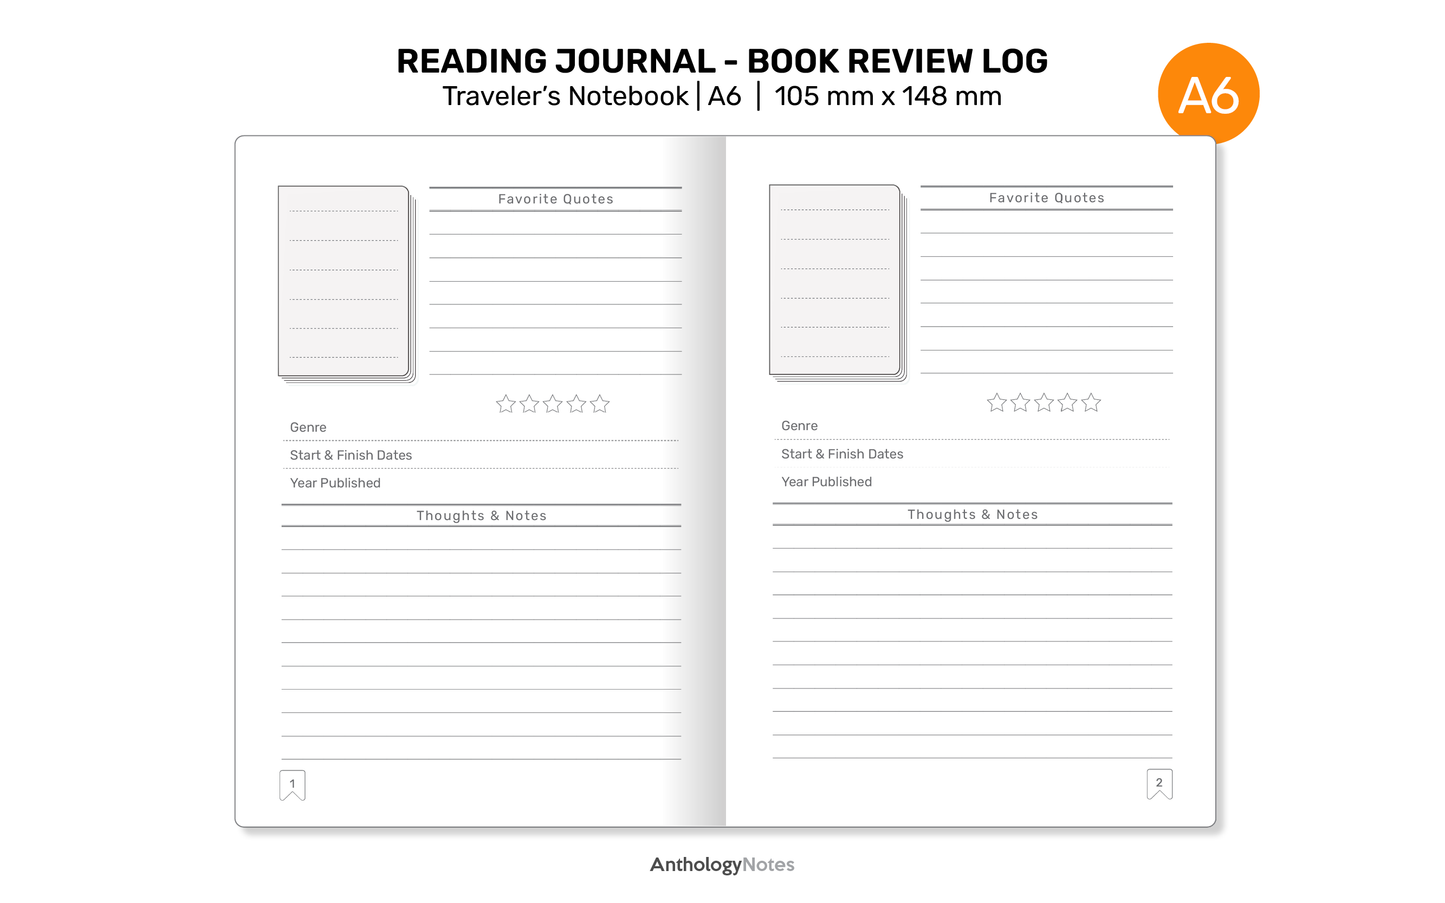 TN A6 READING Journal Printable Refill Insert for Traveler's Notebook - Book Review Log - A622-009